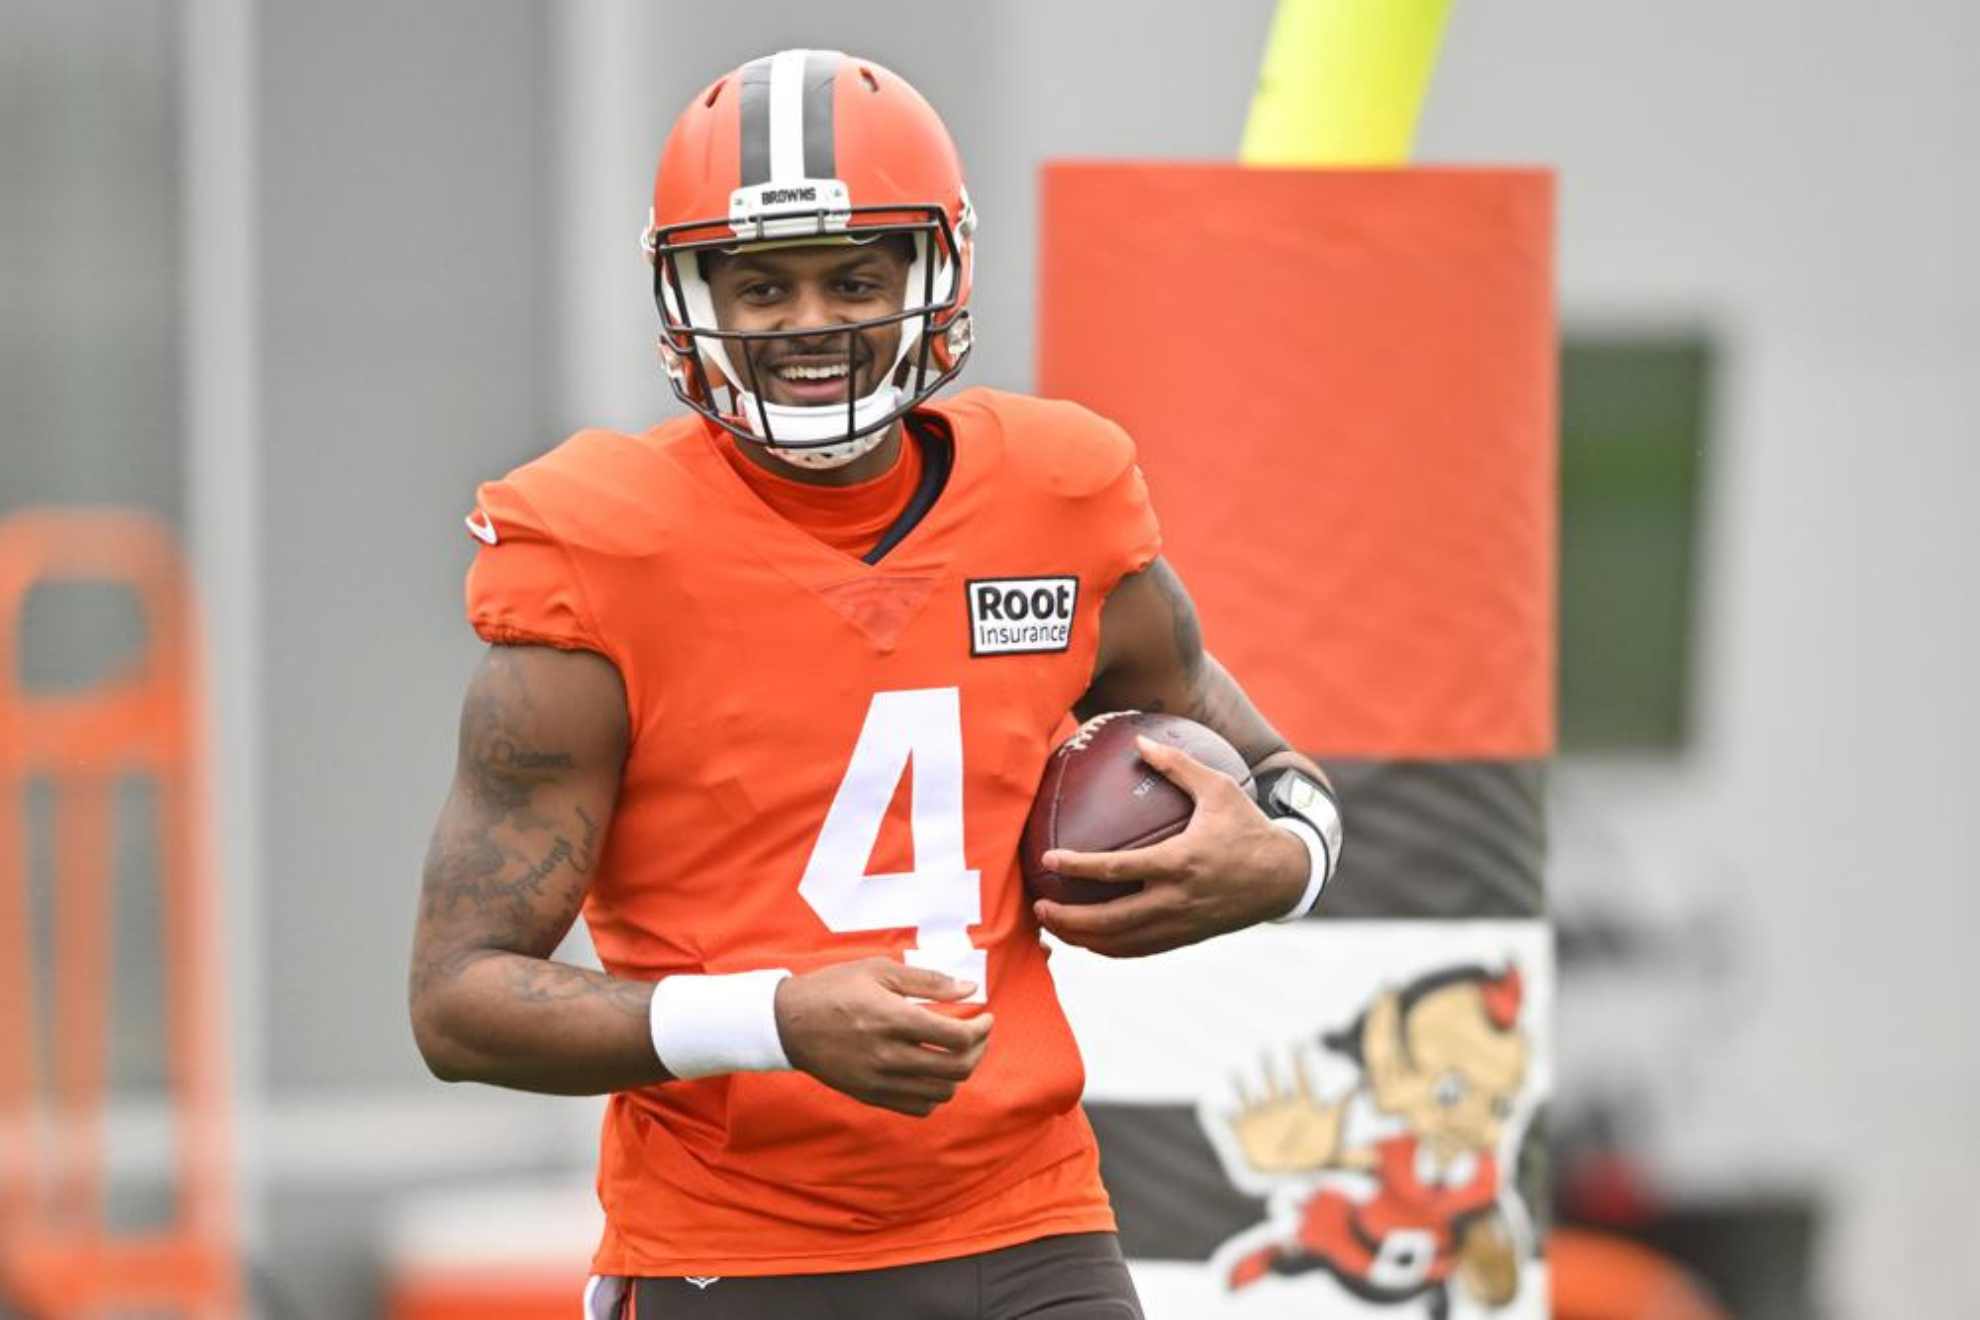 Cleveland Browns QB Deshaun Watson stands on the field at the team's training facility.